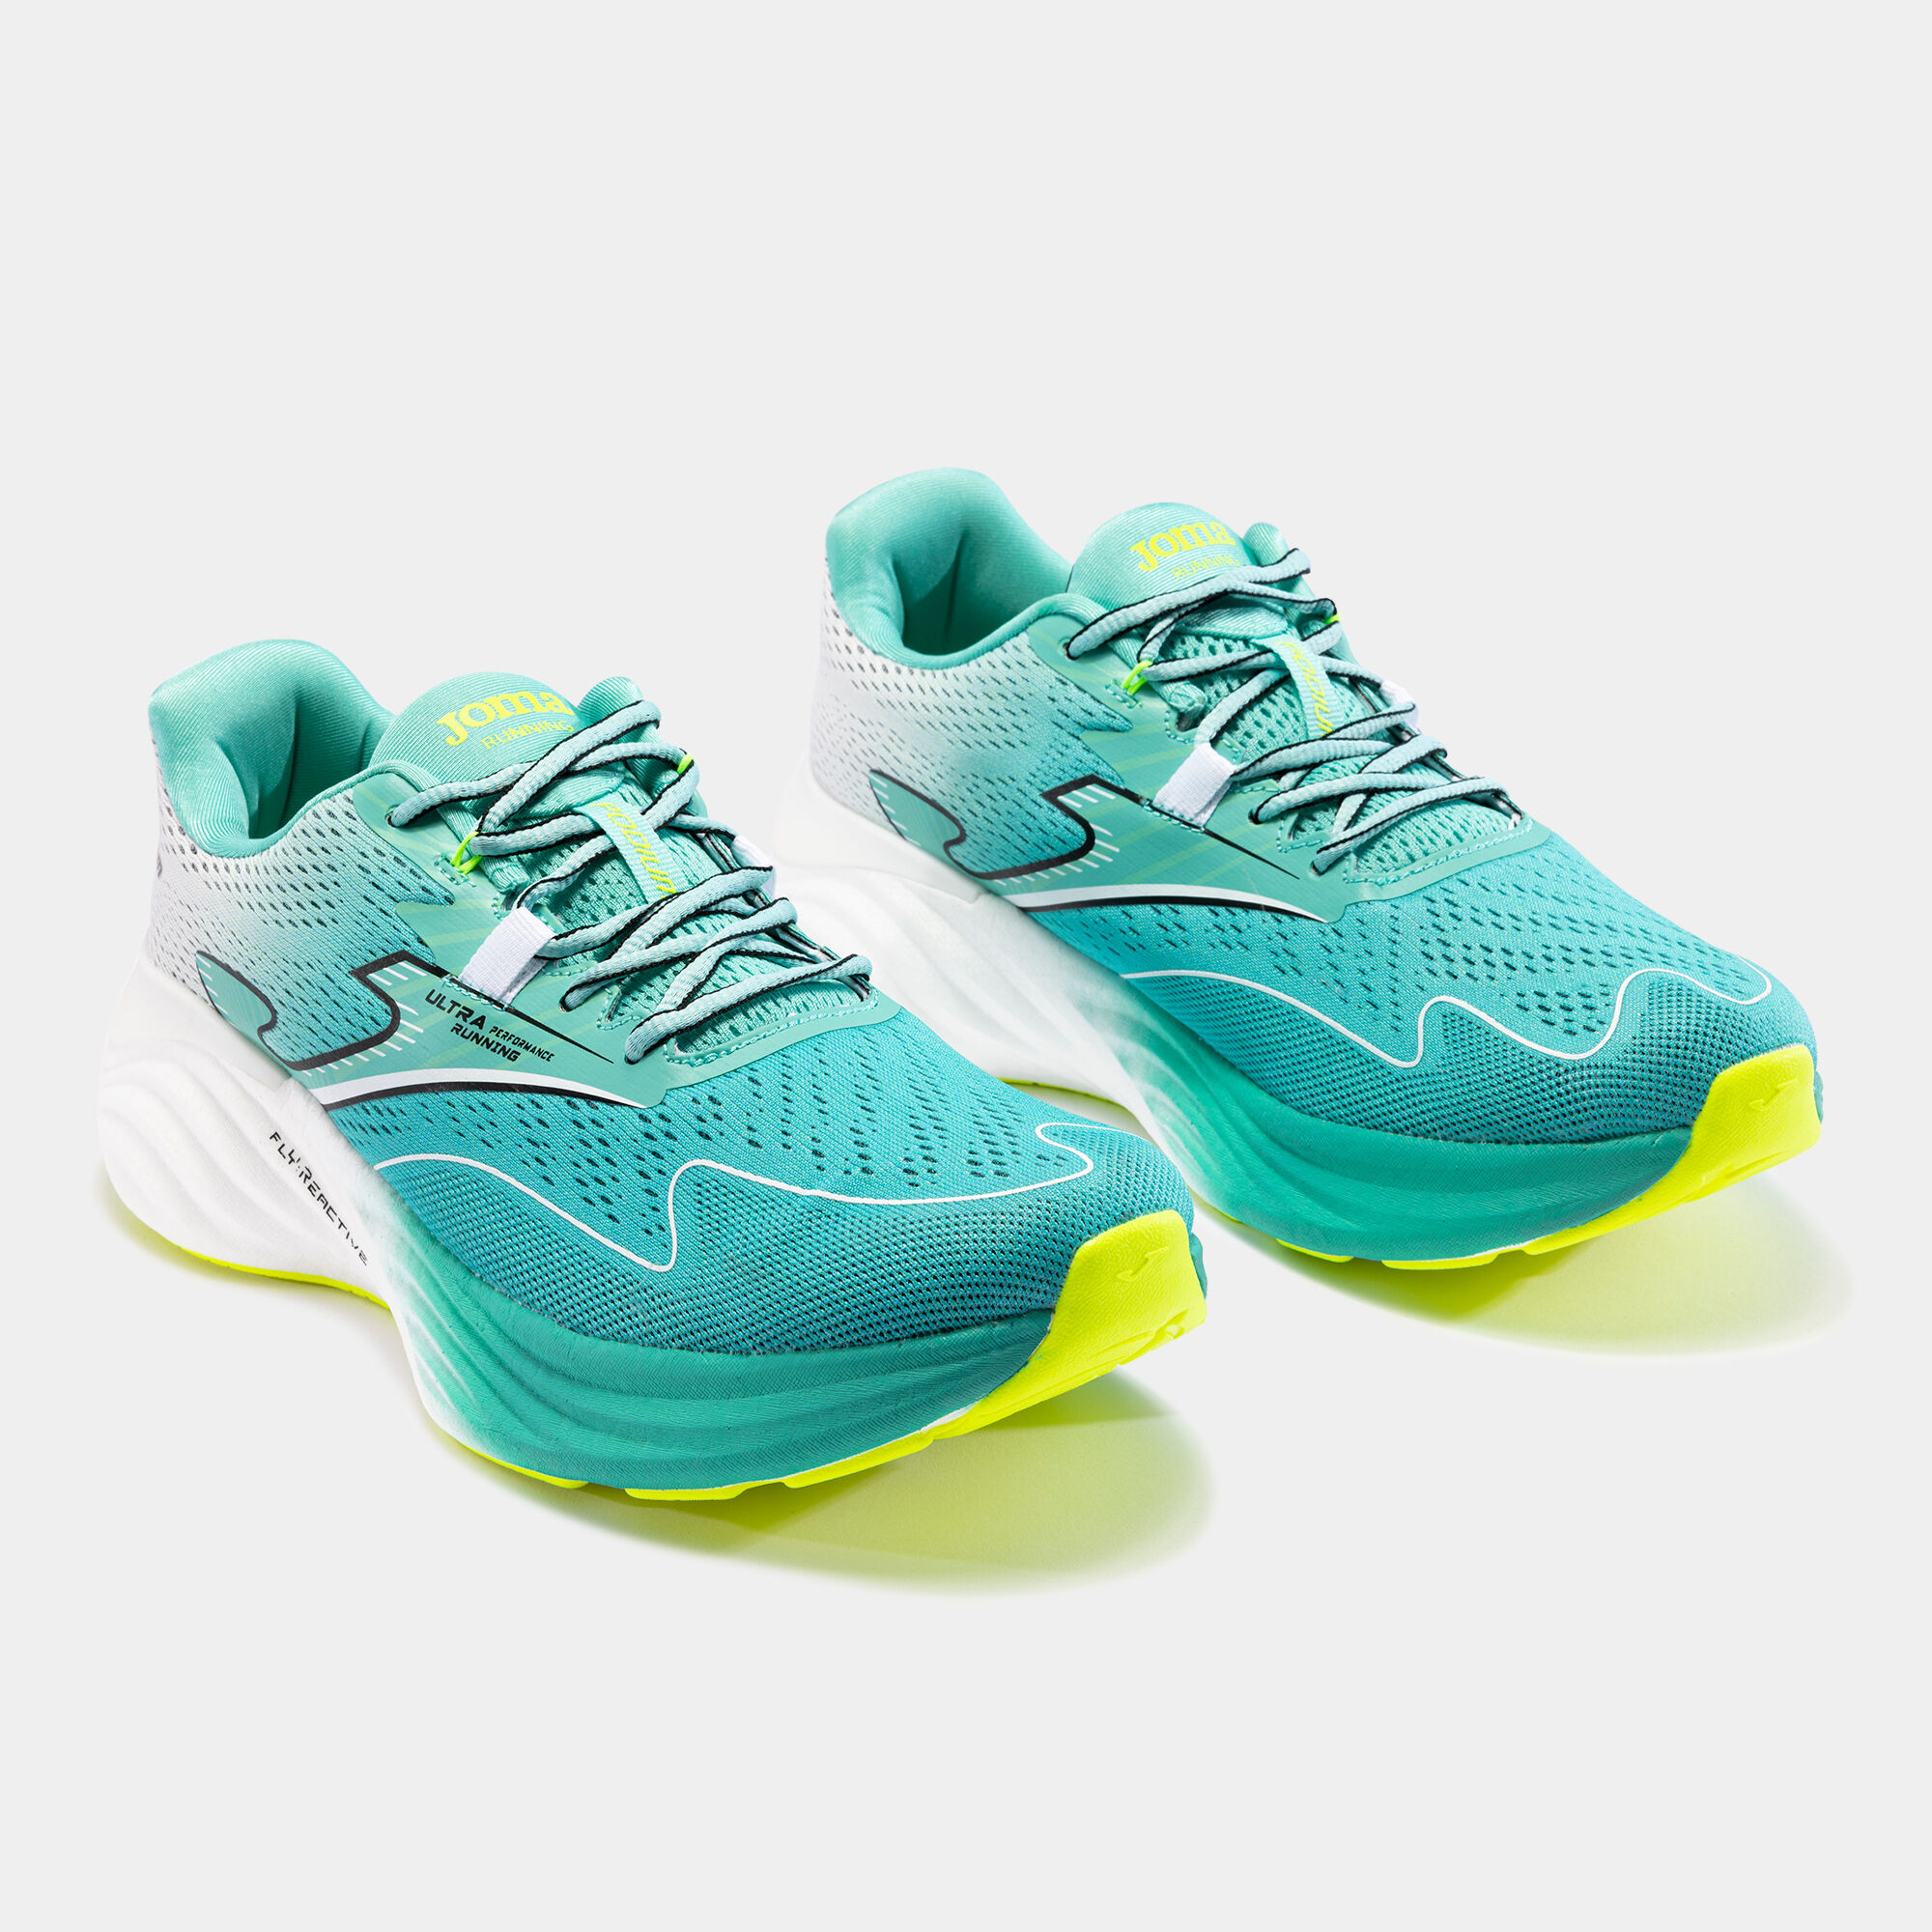 Chaussures running R.Podium 23 homme turquoise